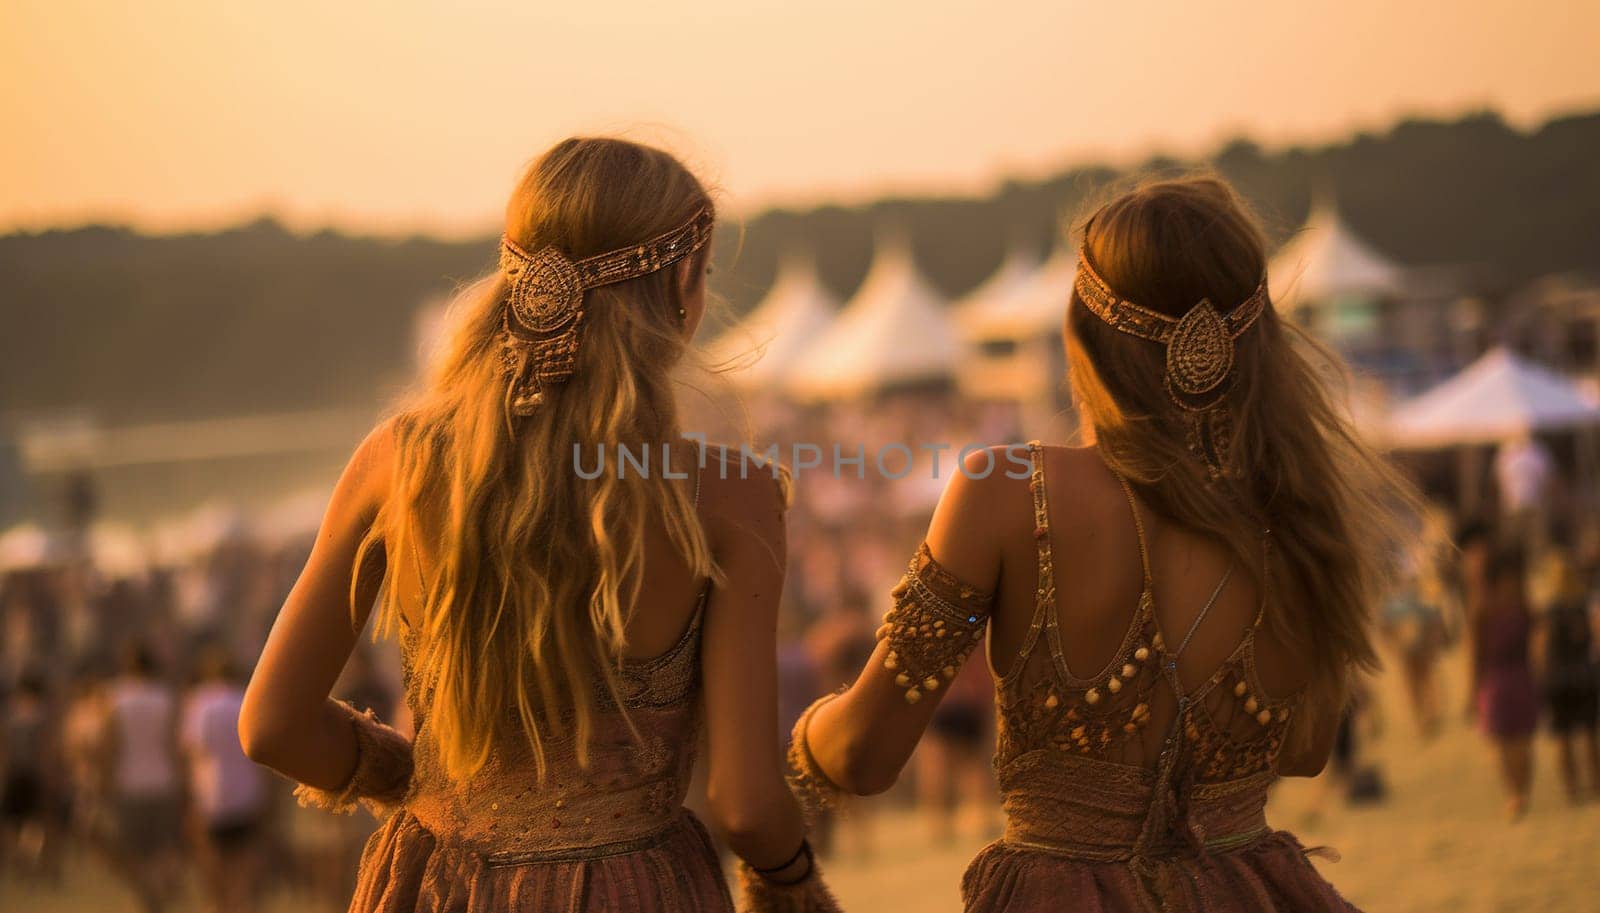 Two female friends dancing and having fun at music festival in the summer. Summer Holiday vacation concept. Happy young woman having fun sunlight bohemian style girls